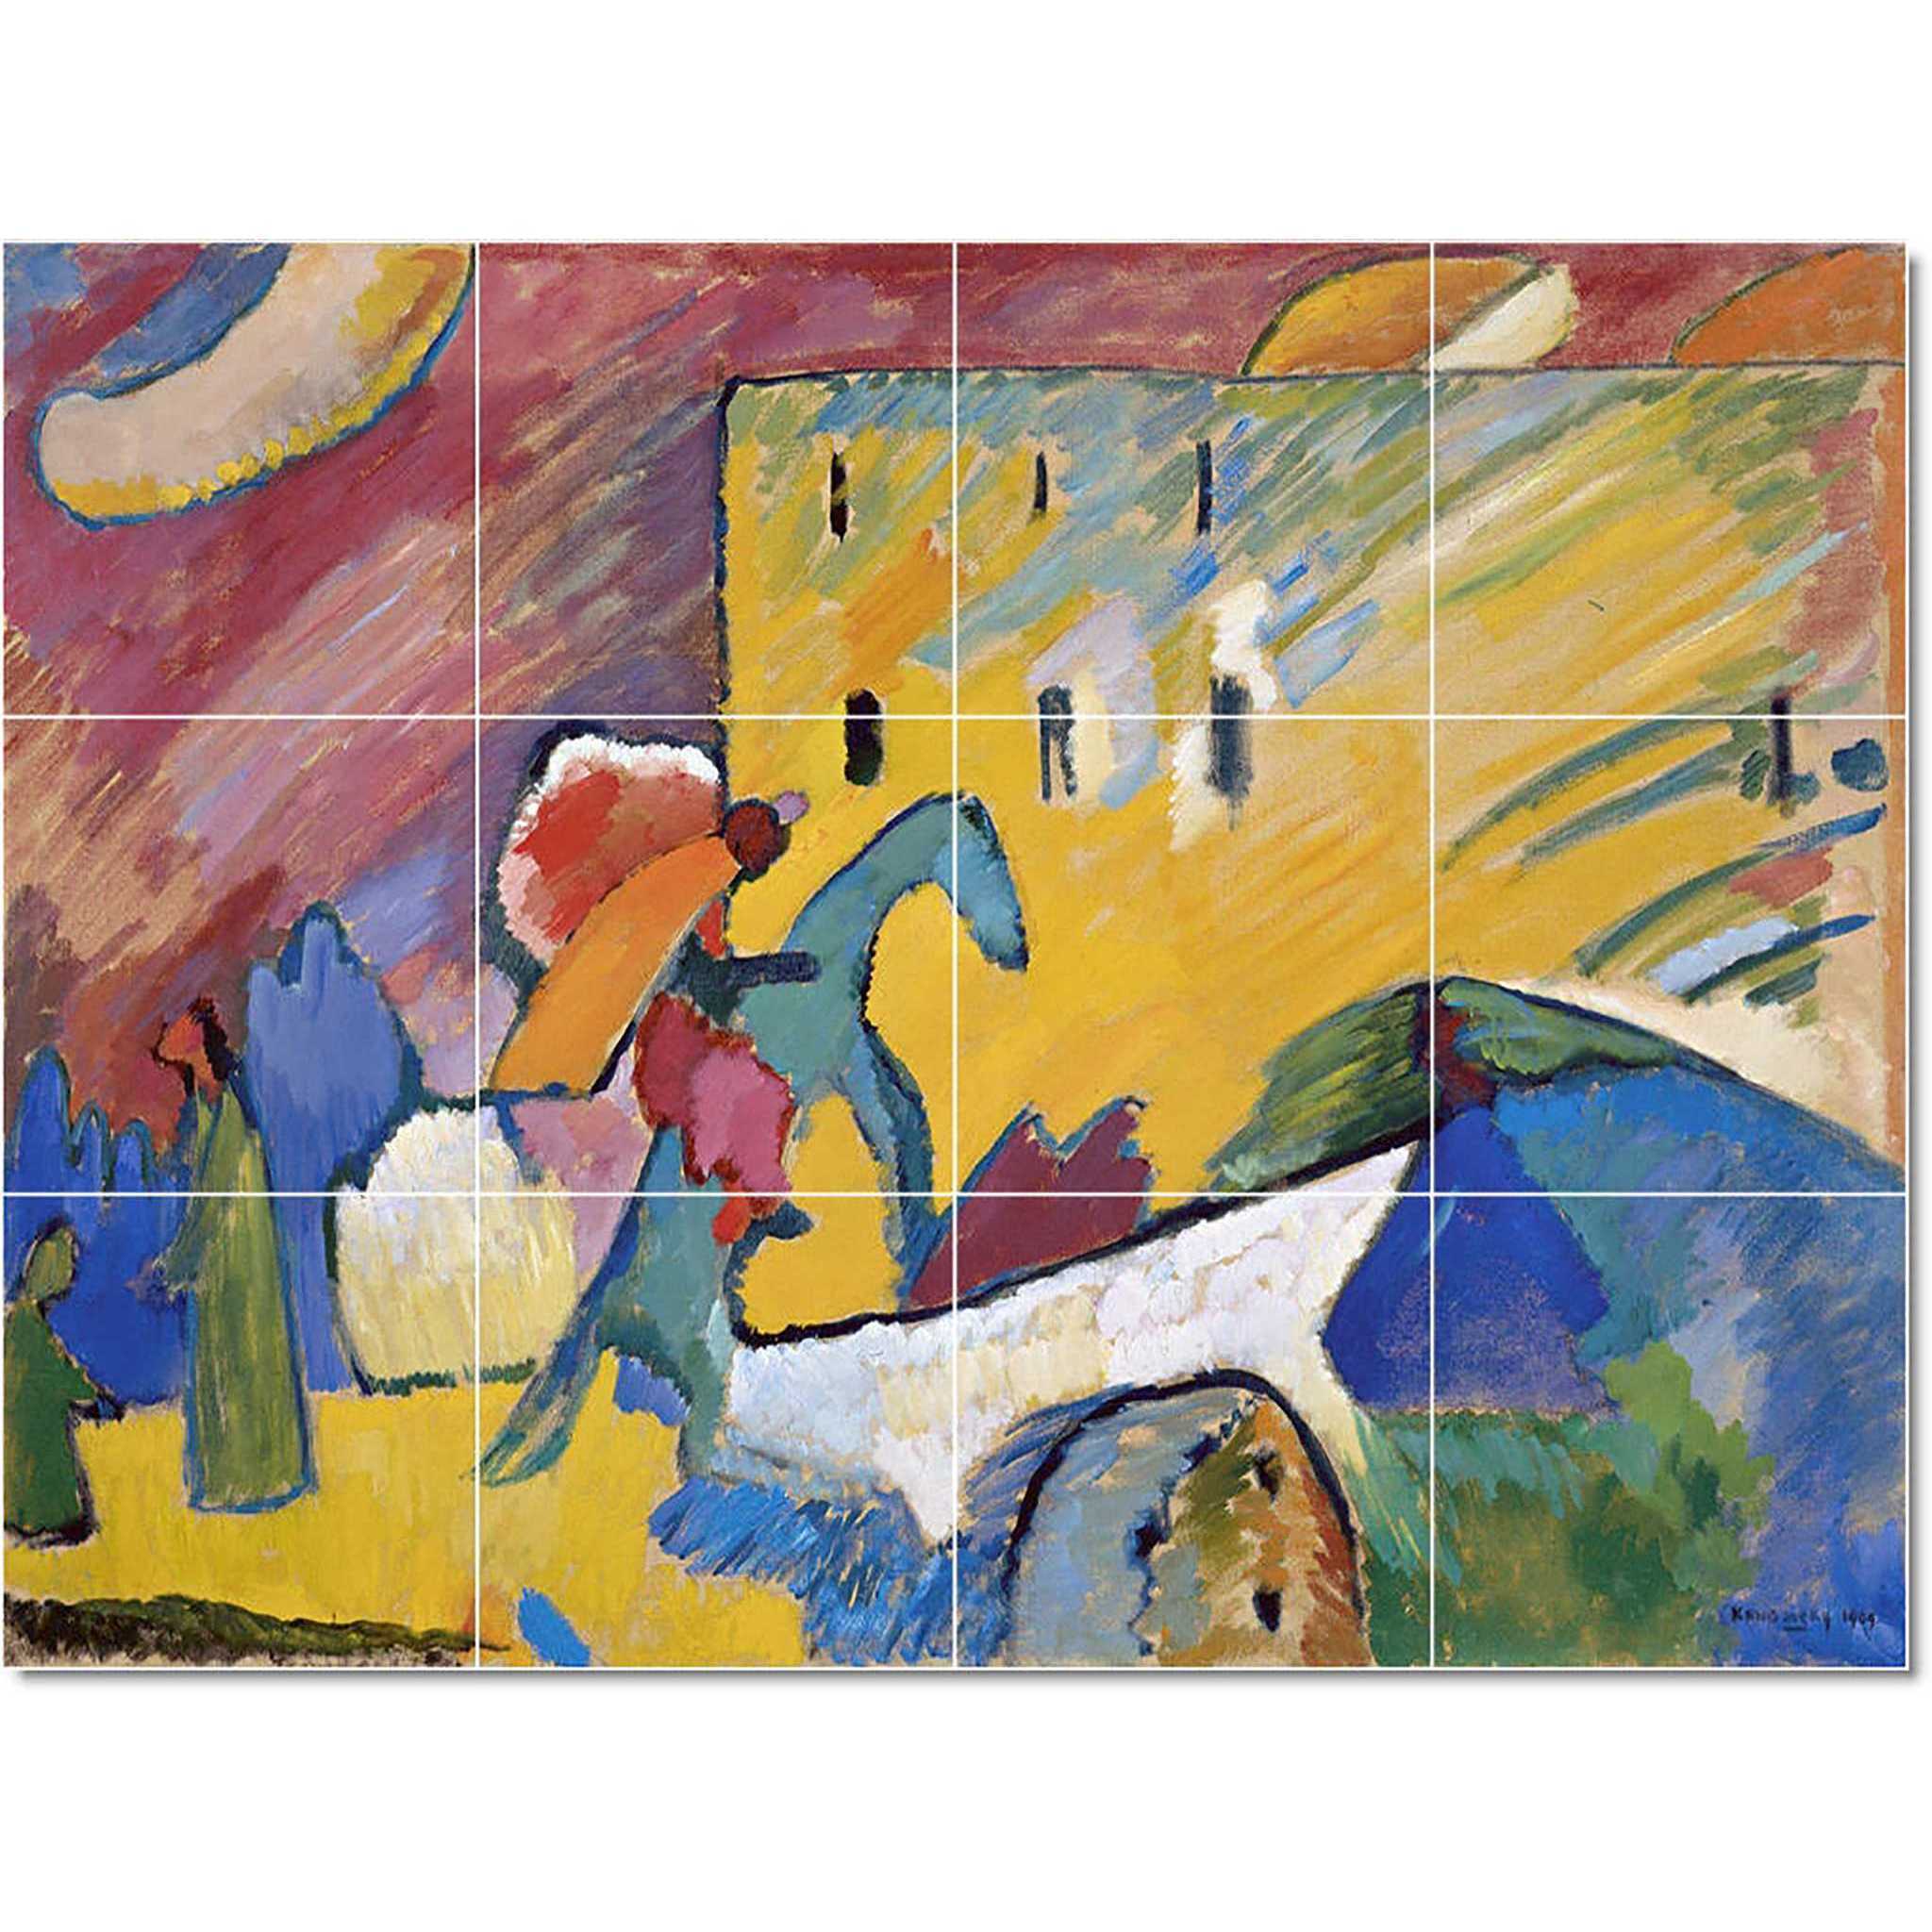 wassily kandinsky abstract painting ceramic tile mural p22719